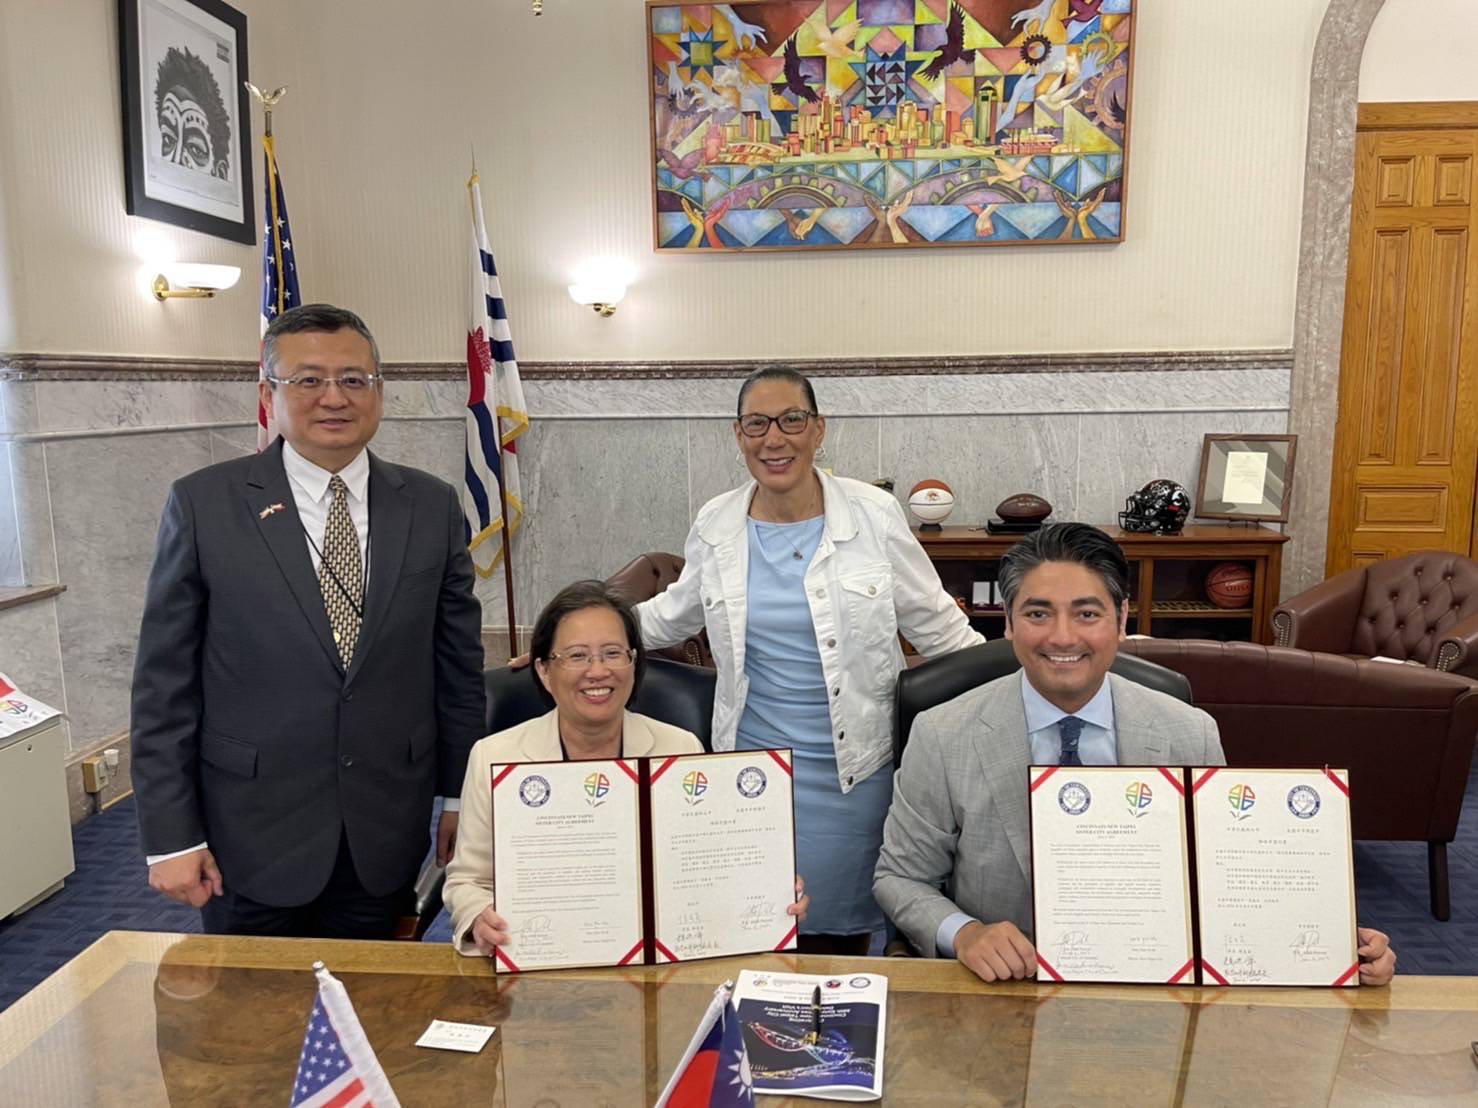  Cincinnati Mayor Aftab Pureval (right) and Dr. Caroline Lu-Lin Wang, Inspector of the New Taipei City Education Department (second from left), hold the sister city agreement. In the background, from left: Director General Yen-Feng Lei of the Taipei Economic and Cultural Office in Chicago, and Vice Mayor of Cincinnati, Jan-Michele Kearney.